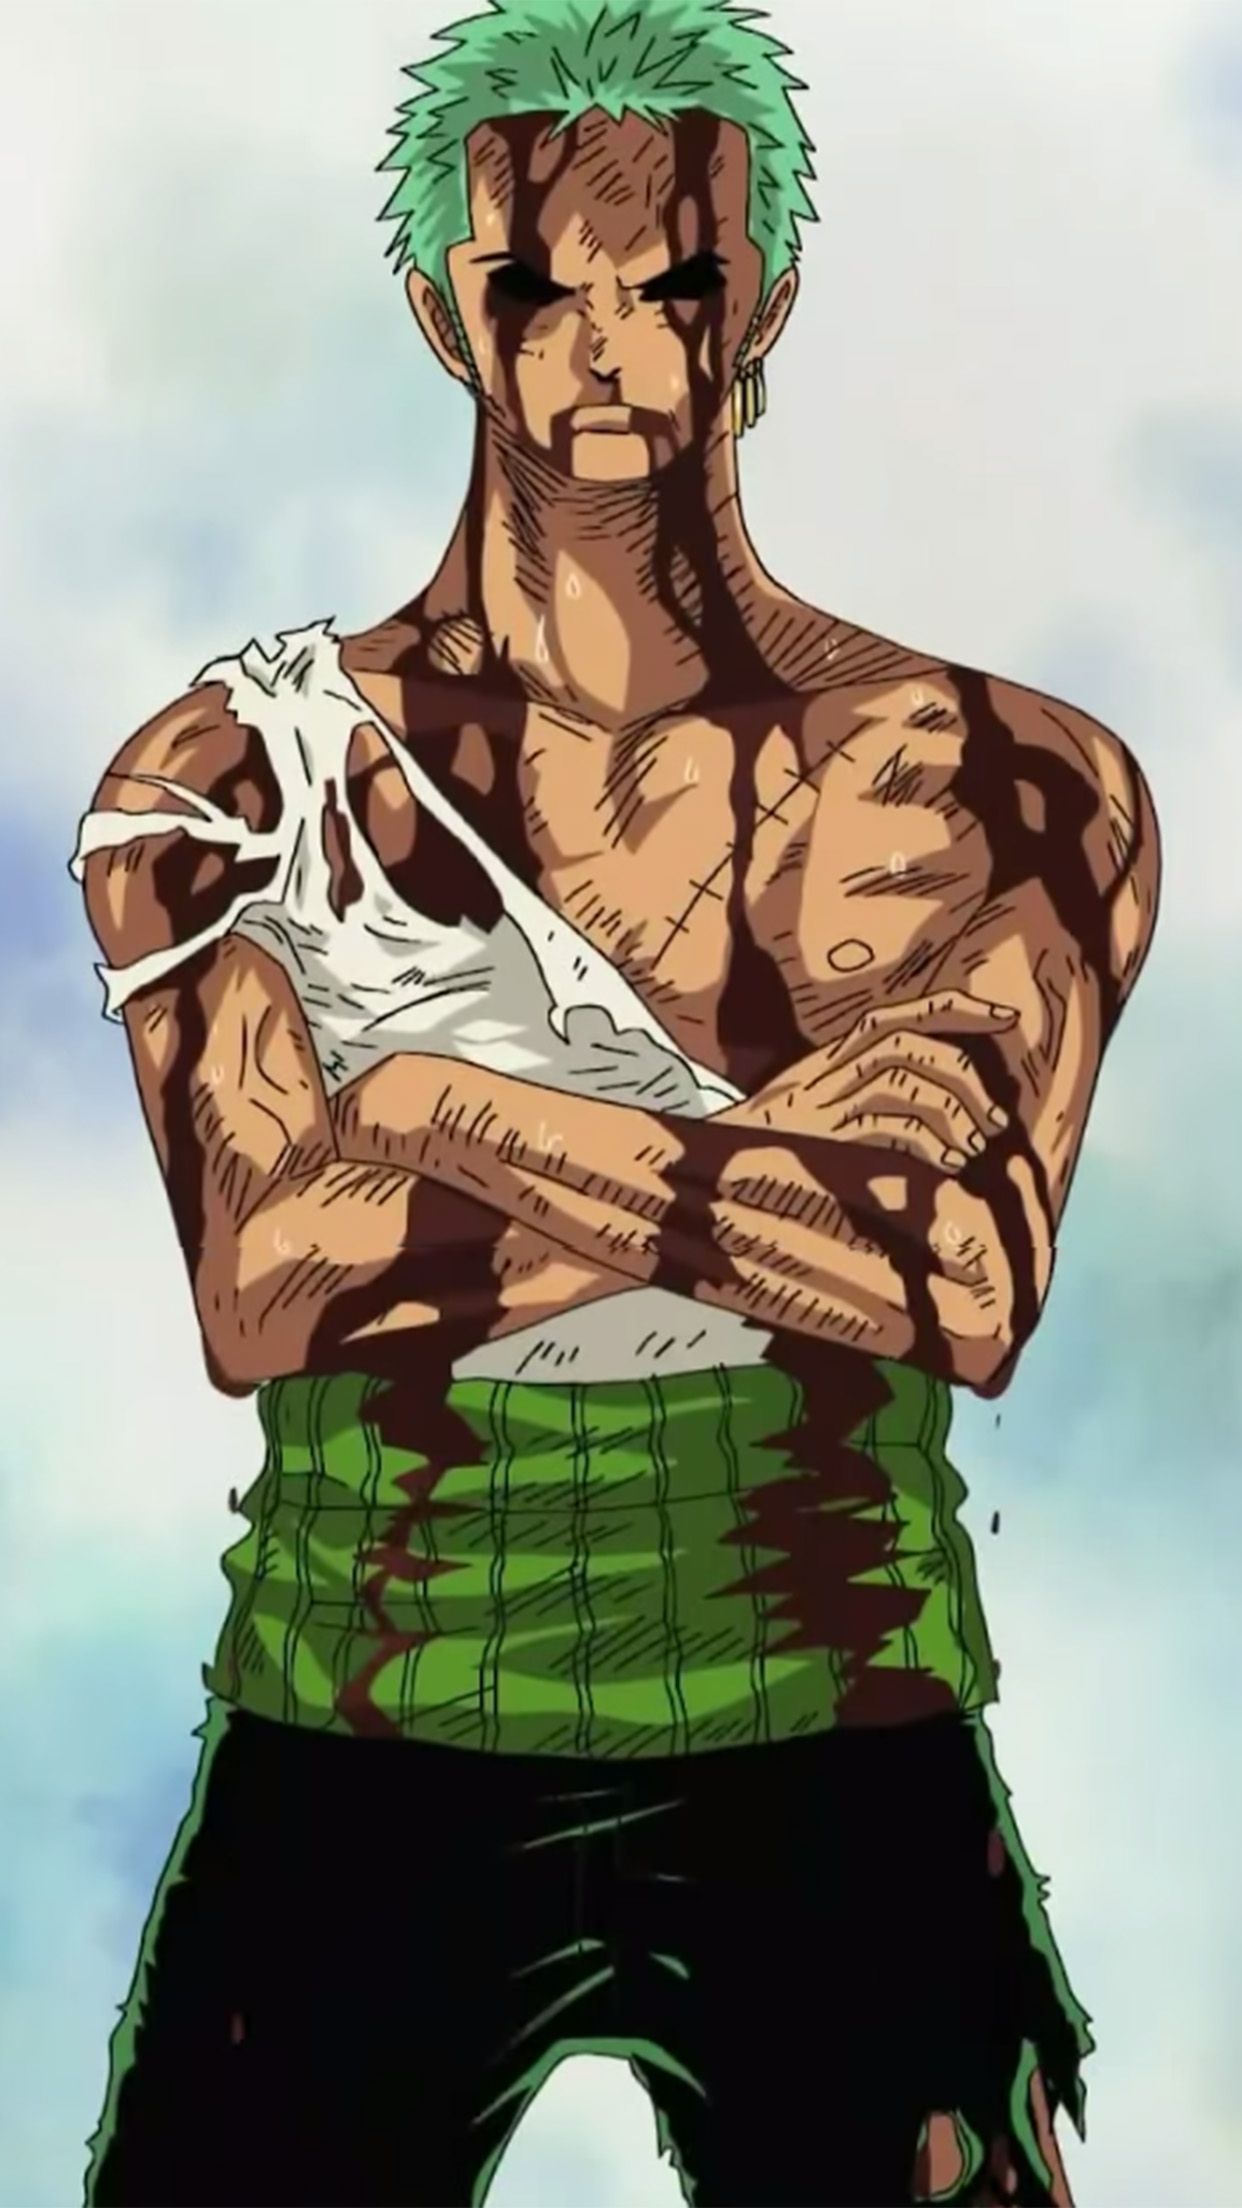 Zoro Background Images Kolpaper Awesome Free Hd Wallpapers